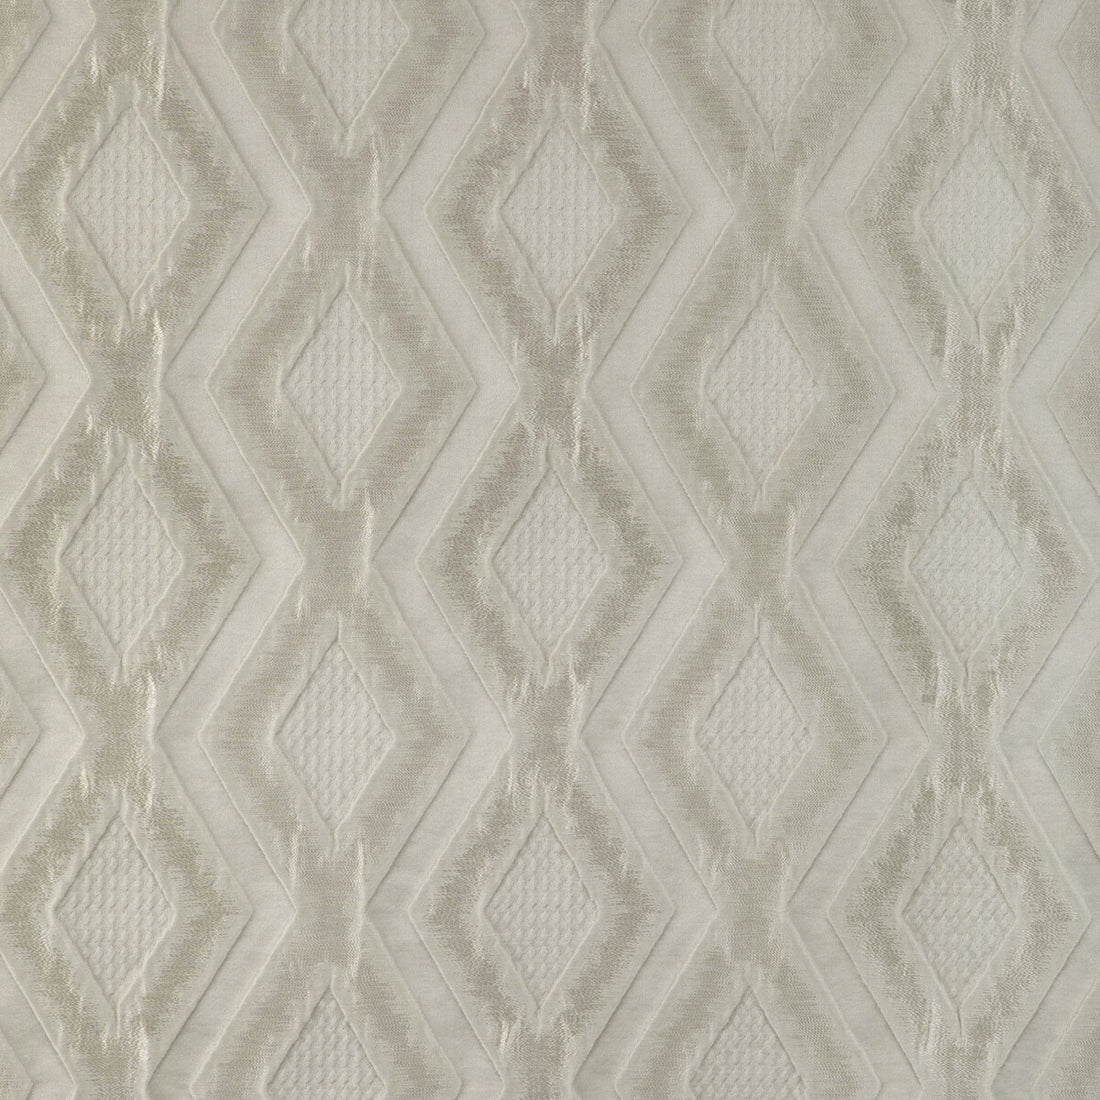 Flawless fabric in blush color - pattern 36839.1.0 - by Kravet Design in the Candice Olson collection